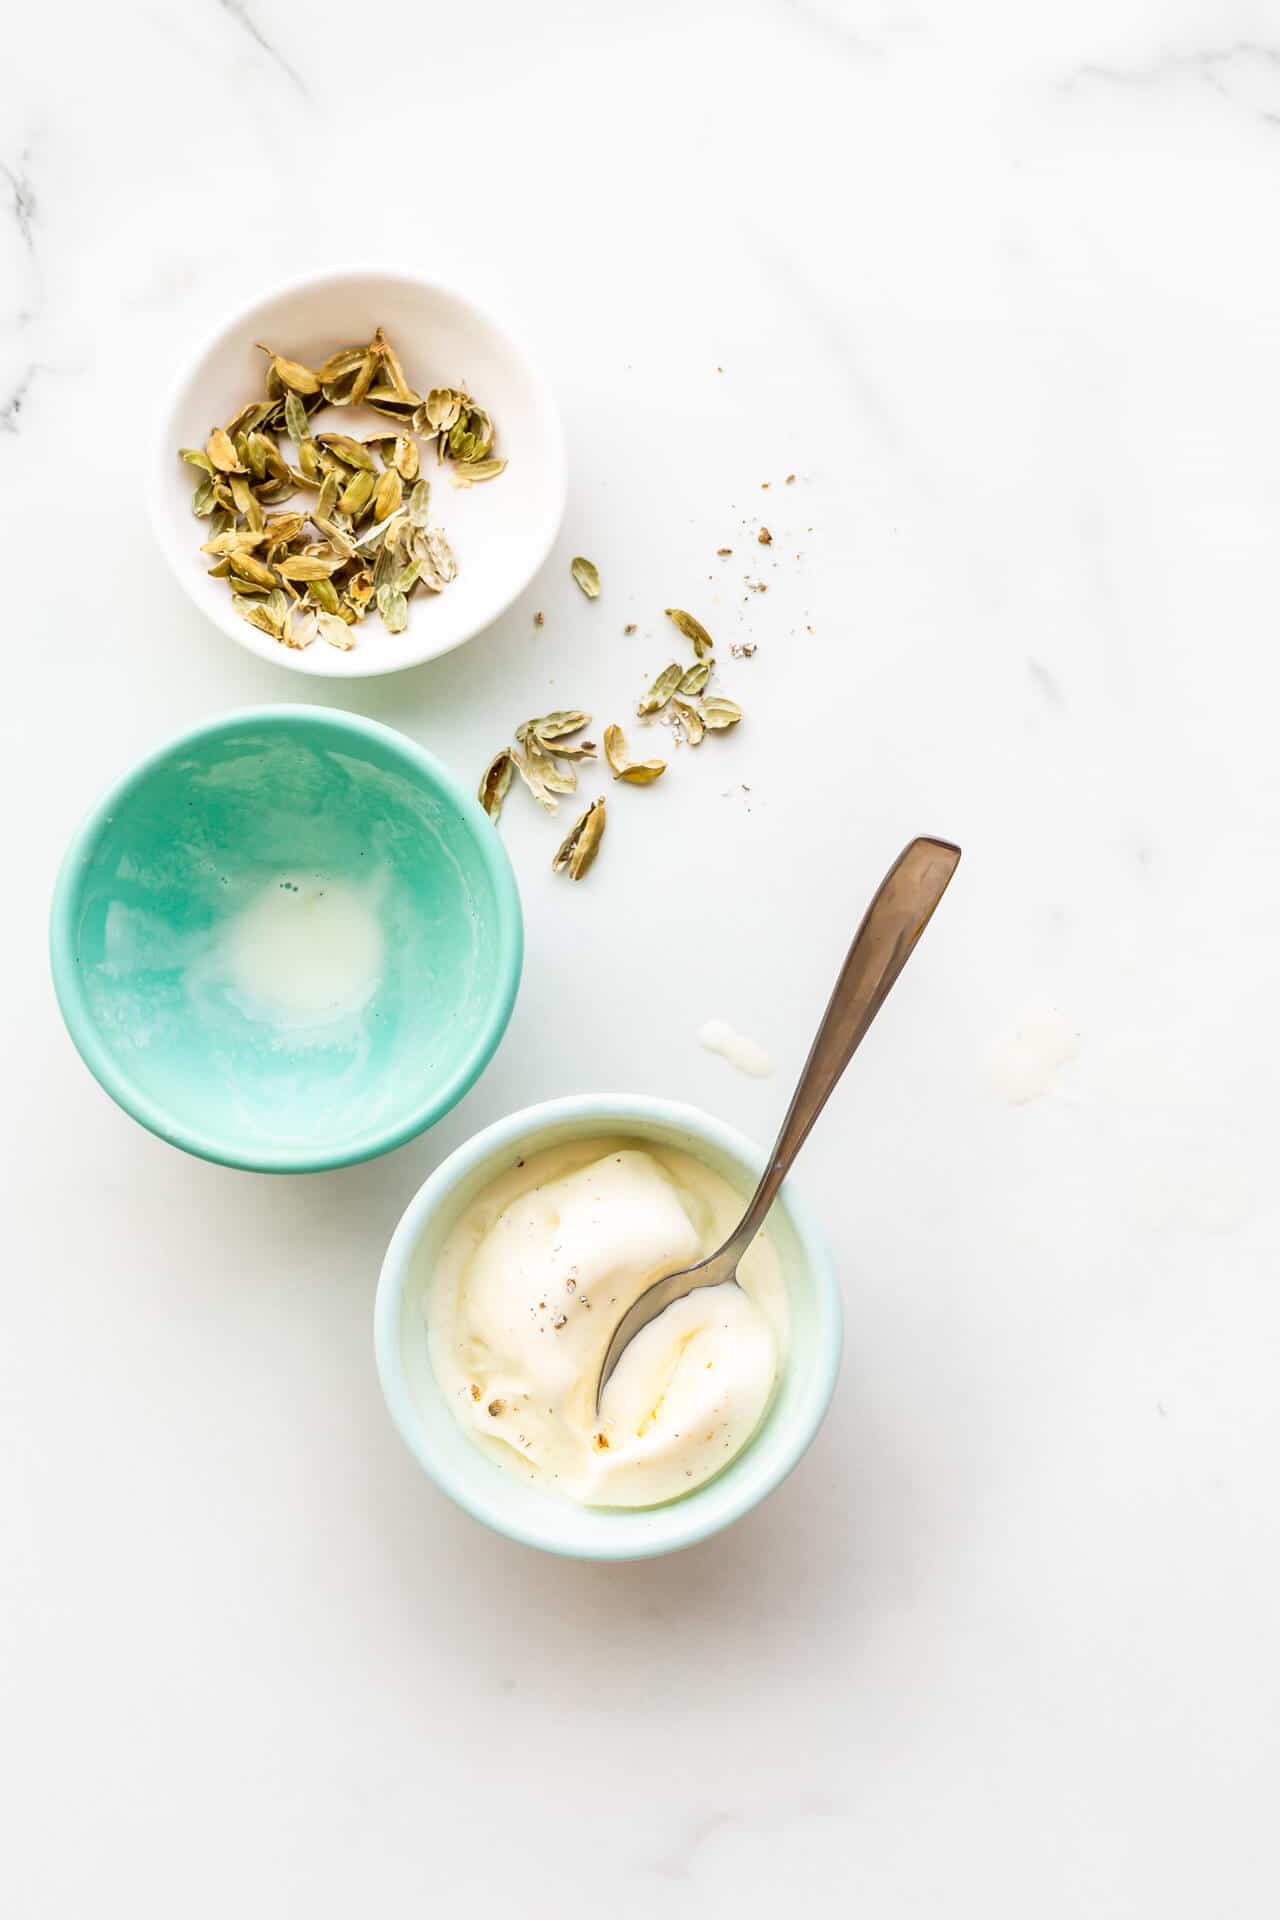 Bowls of cardamom ice cream, one finished, and a small bowl of cardamom pods on the side